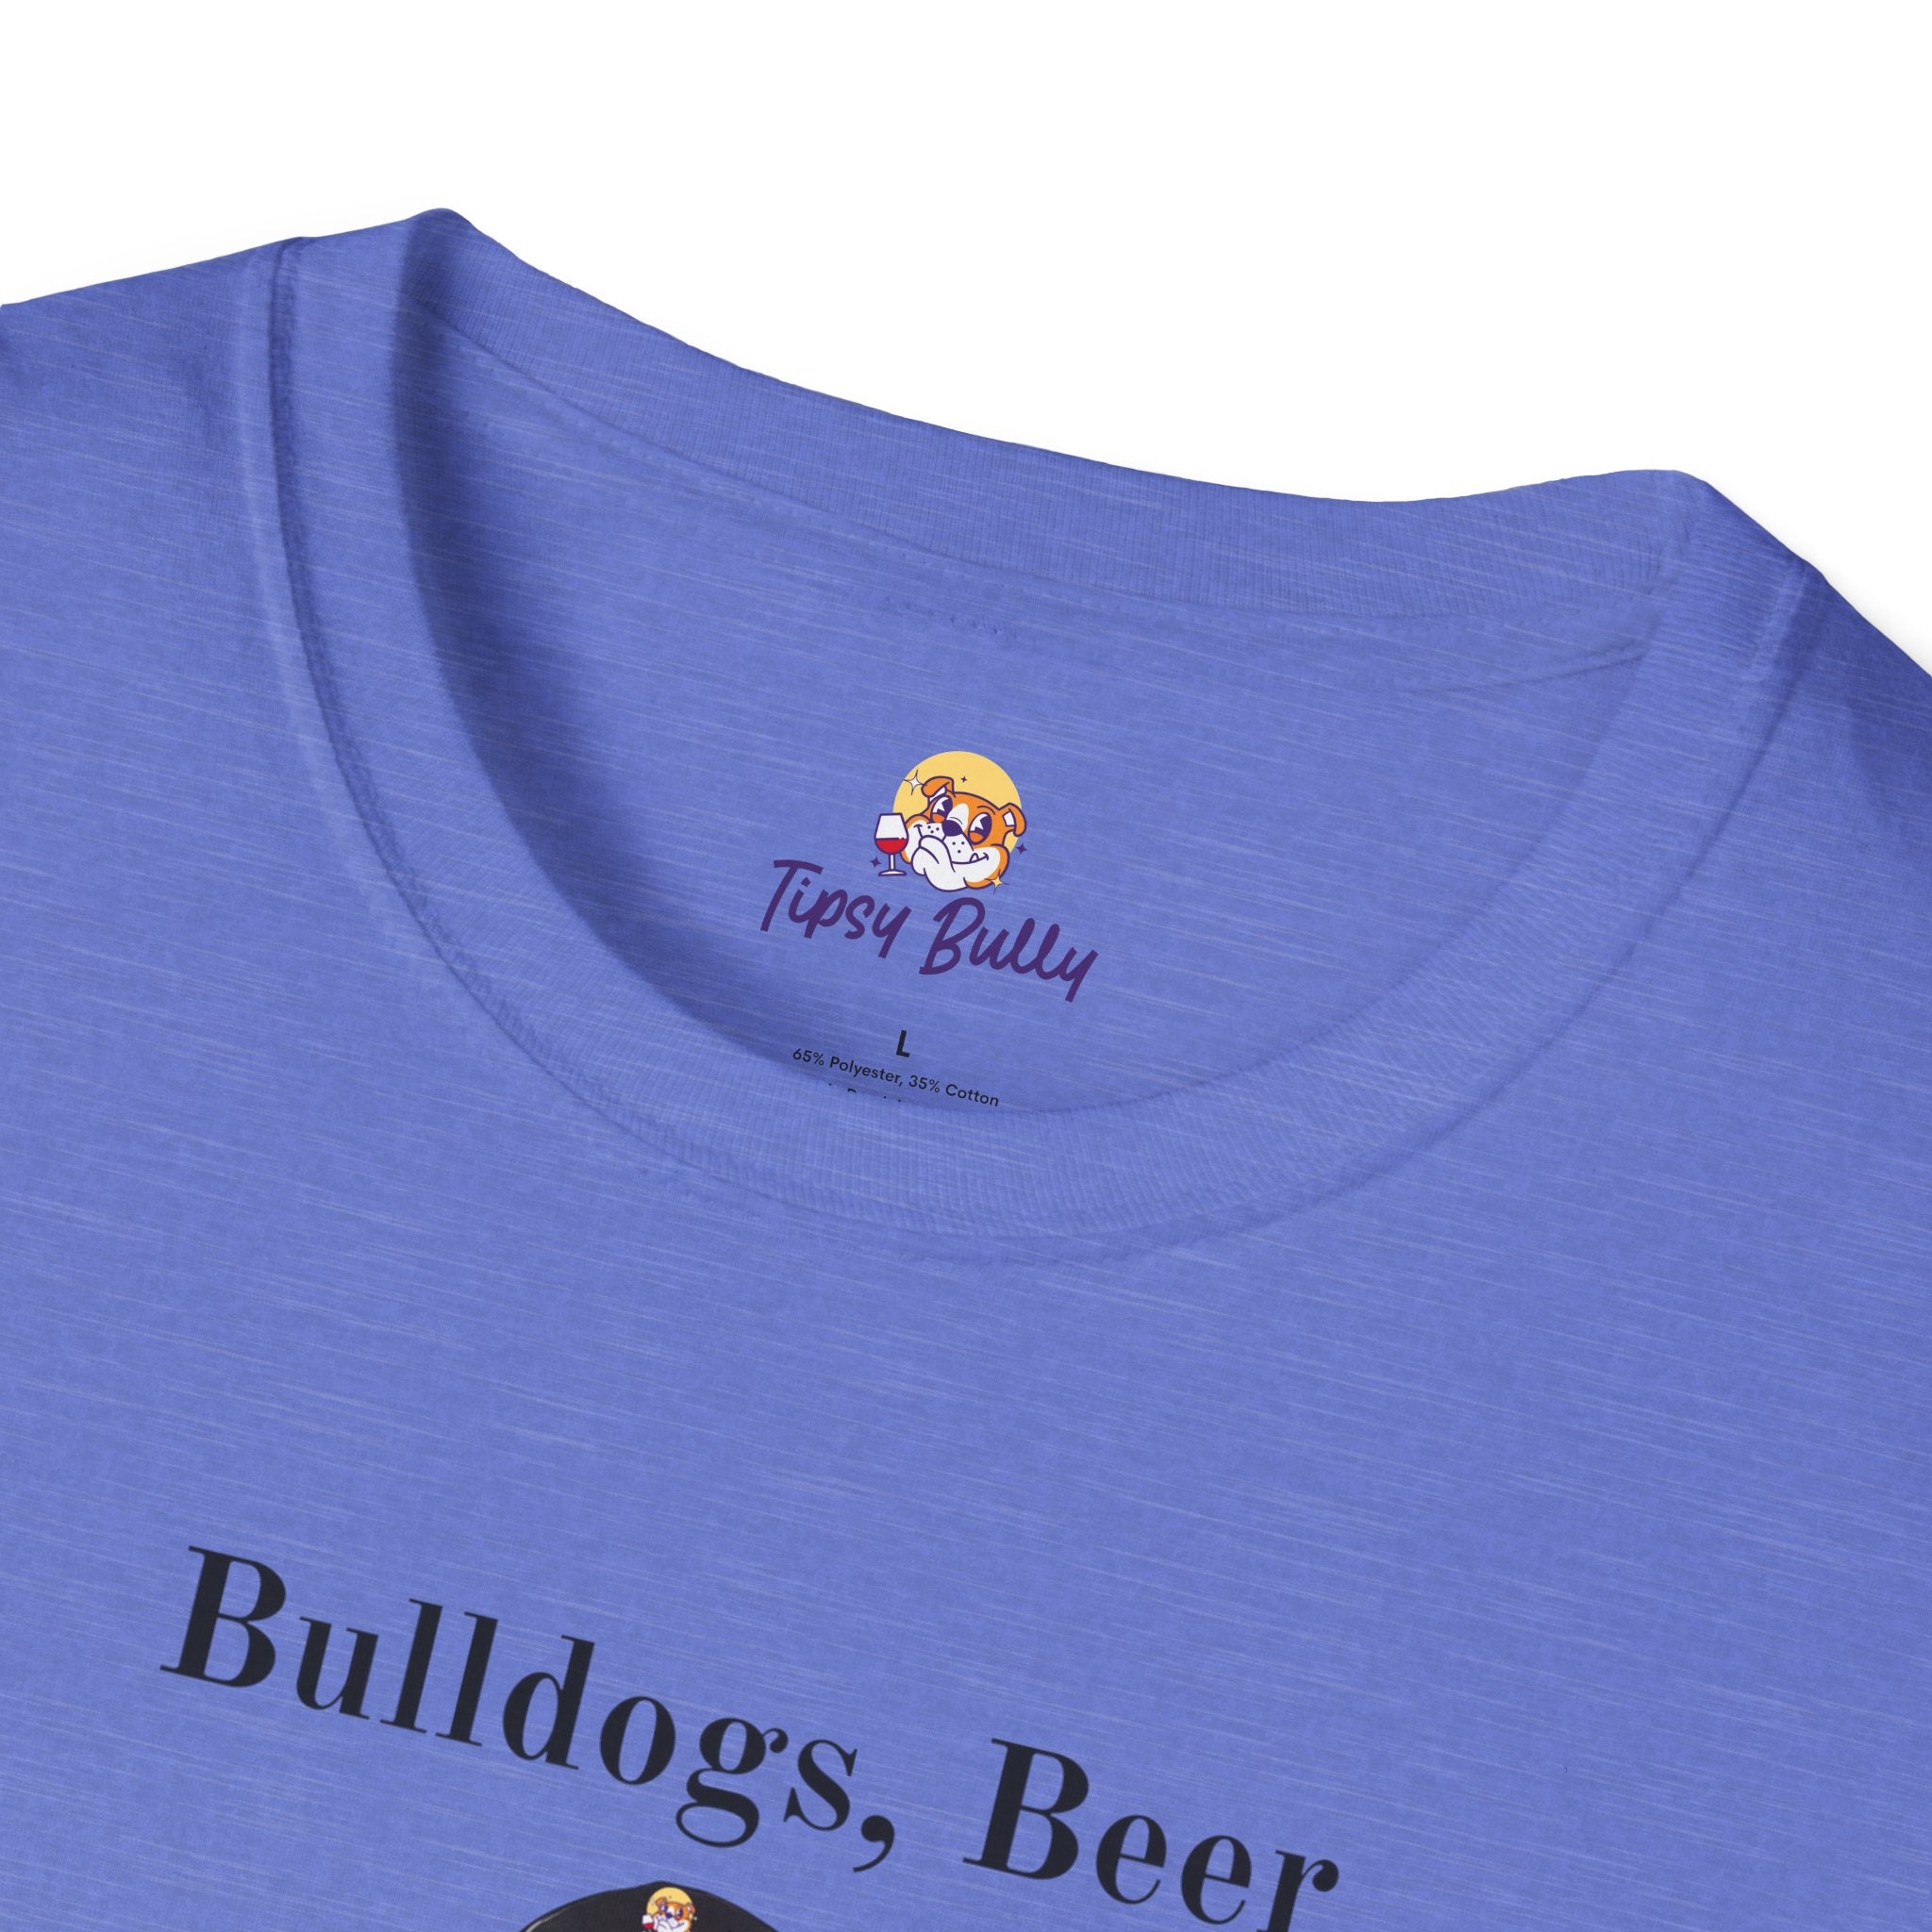 Bulldogs, Beer, and Bad Decisions" Unisex T-Shirt by Tipsy Bully (English/Black)